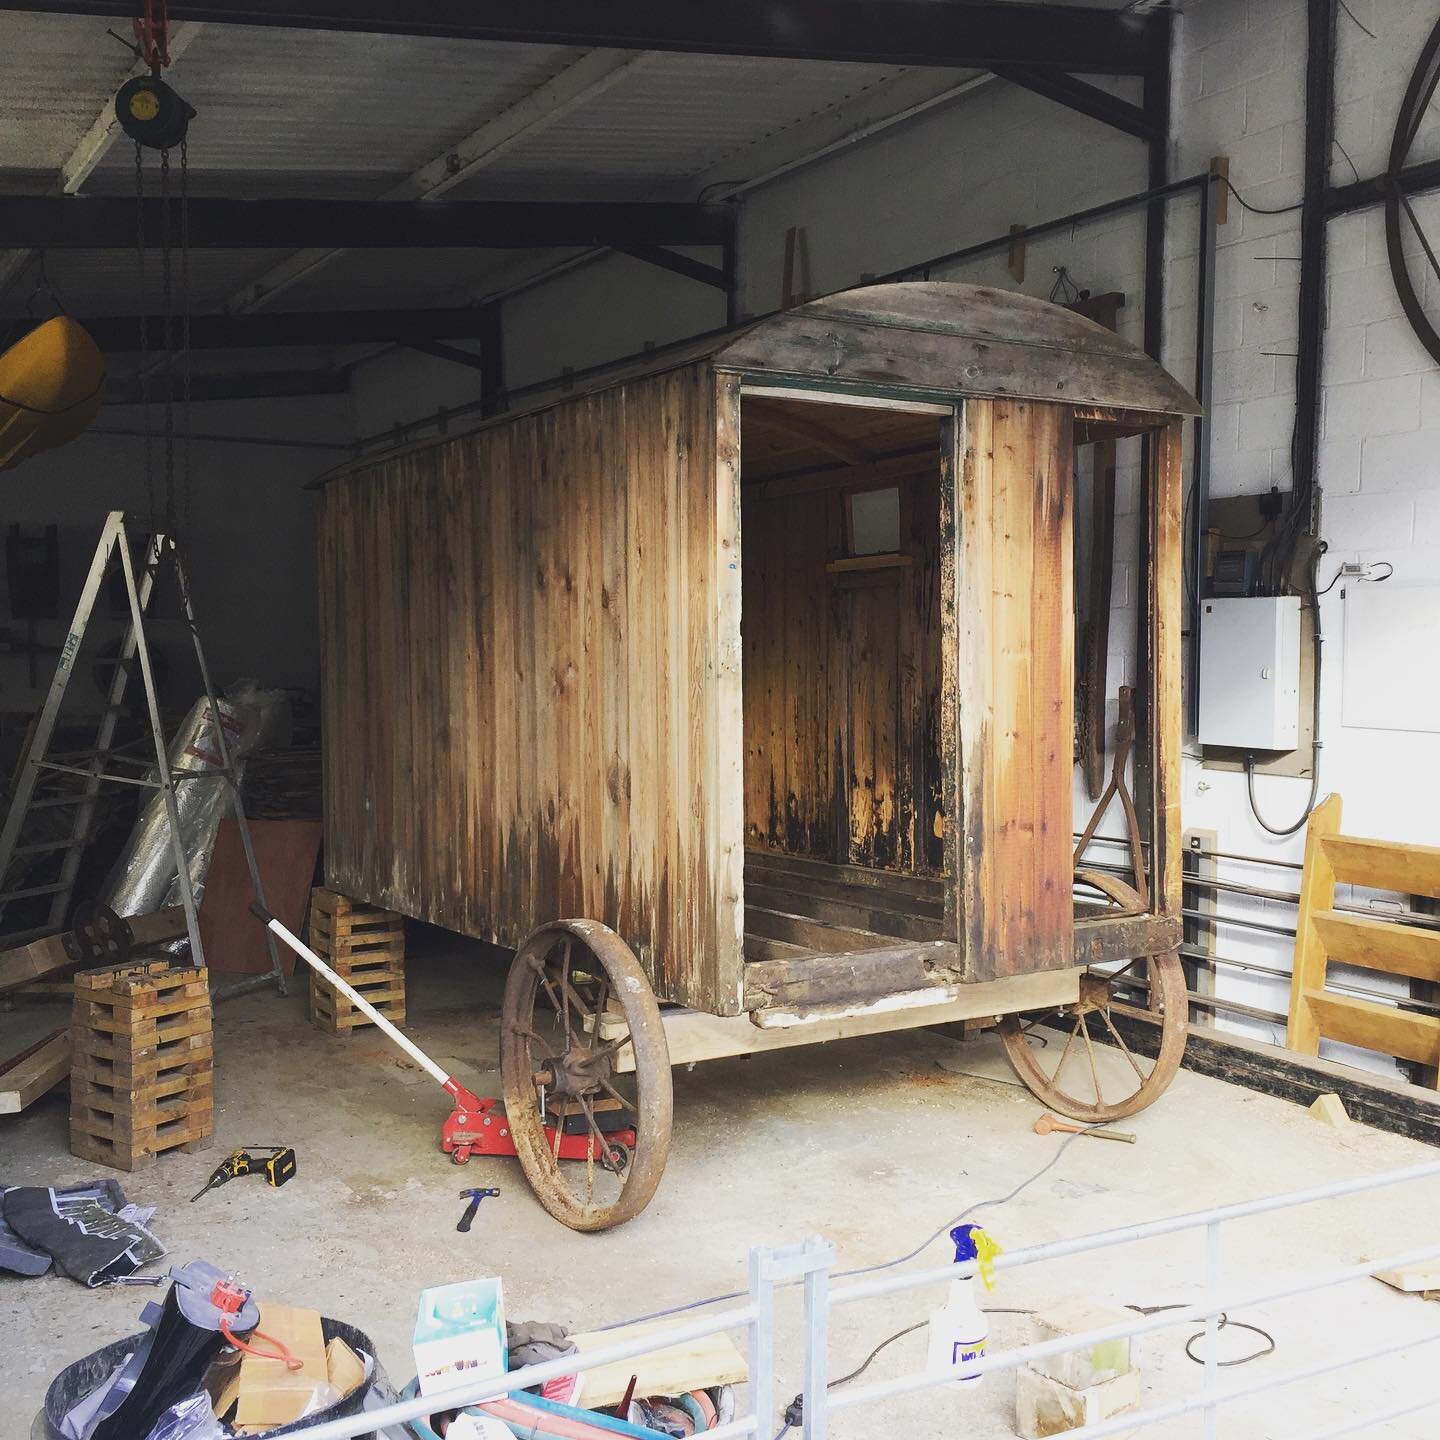 It&rsquo;s been a busy winter restoring a number of lovely old huts here at the Fourpenny Workshop.  Just waiting for the sun to shine so we can get some nice pictures of them ! #shepherdshuts #gardenroom #gardenoffice #thegreatoutdoors #antiques #vi